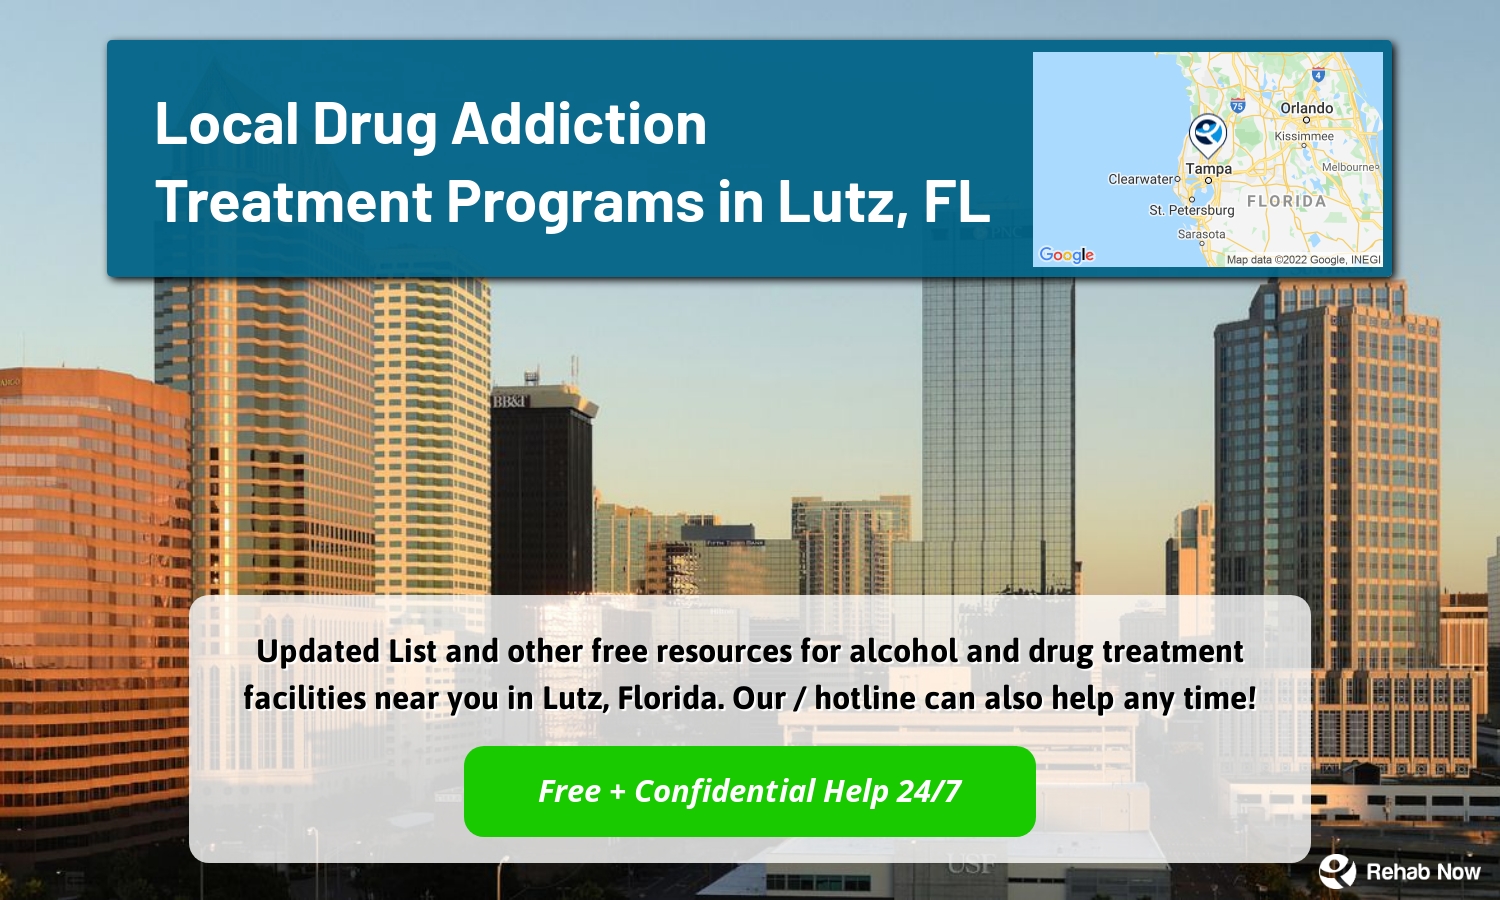  Updated List and other free resources for alcohol and drug treatment facilities near you in Lutz, Florida. Our / hotline can also help any time!